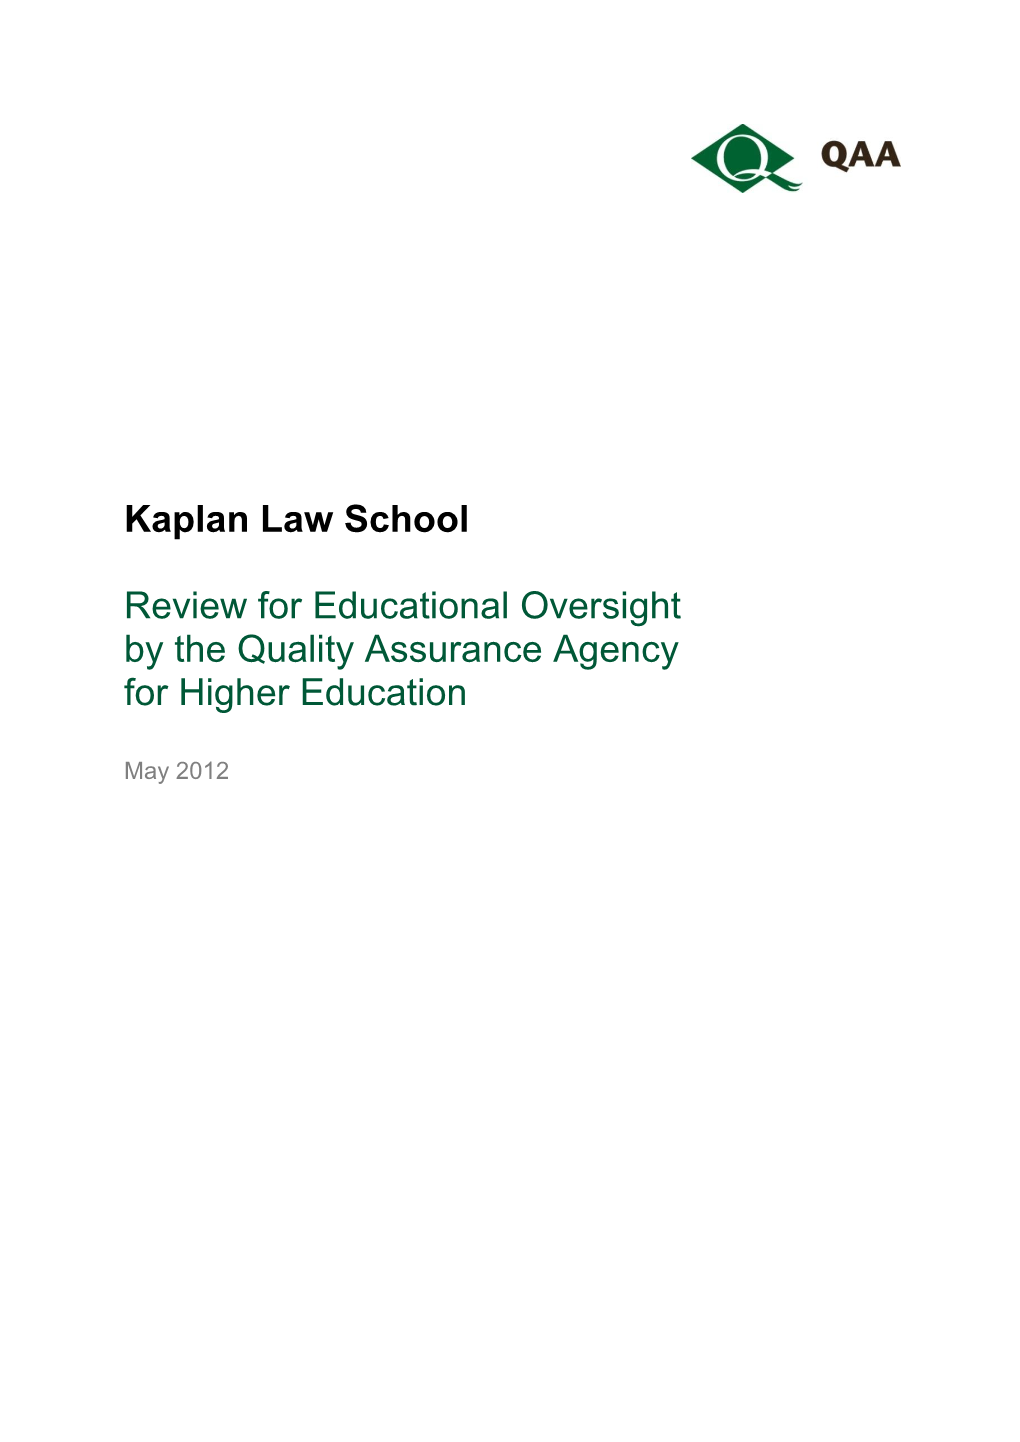 Kaplan Law School Review for Educational Oversight by the Quality